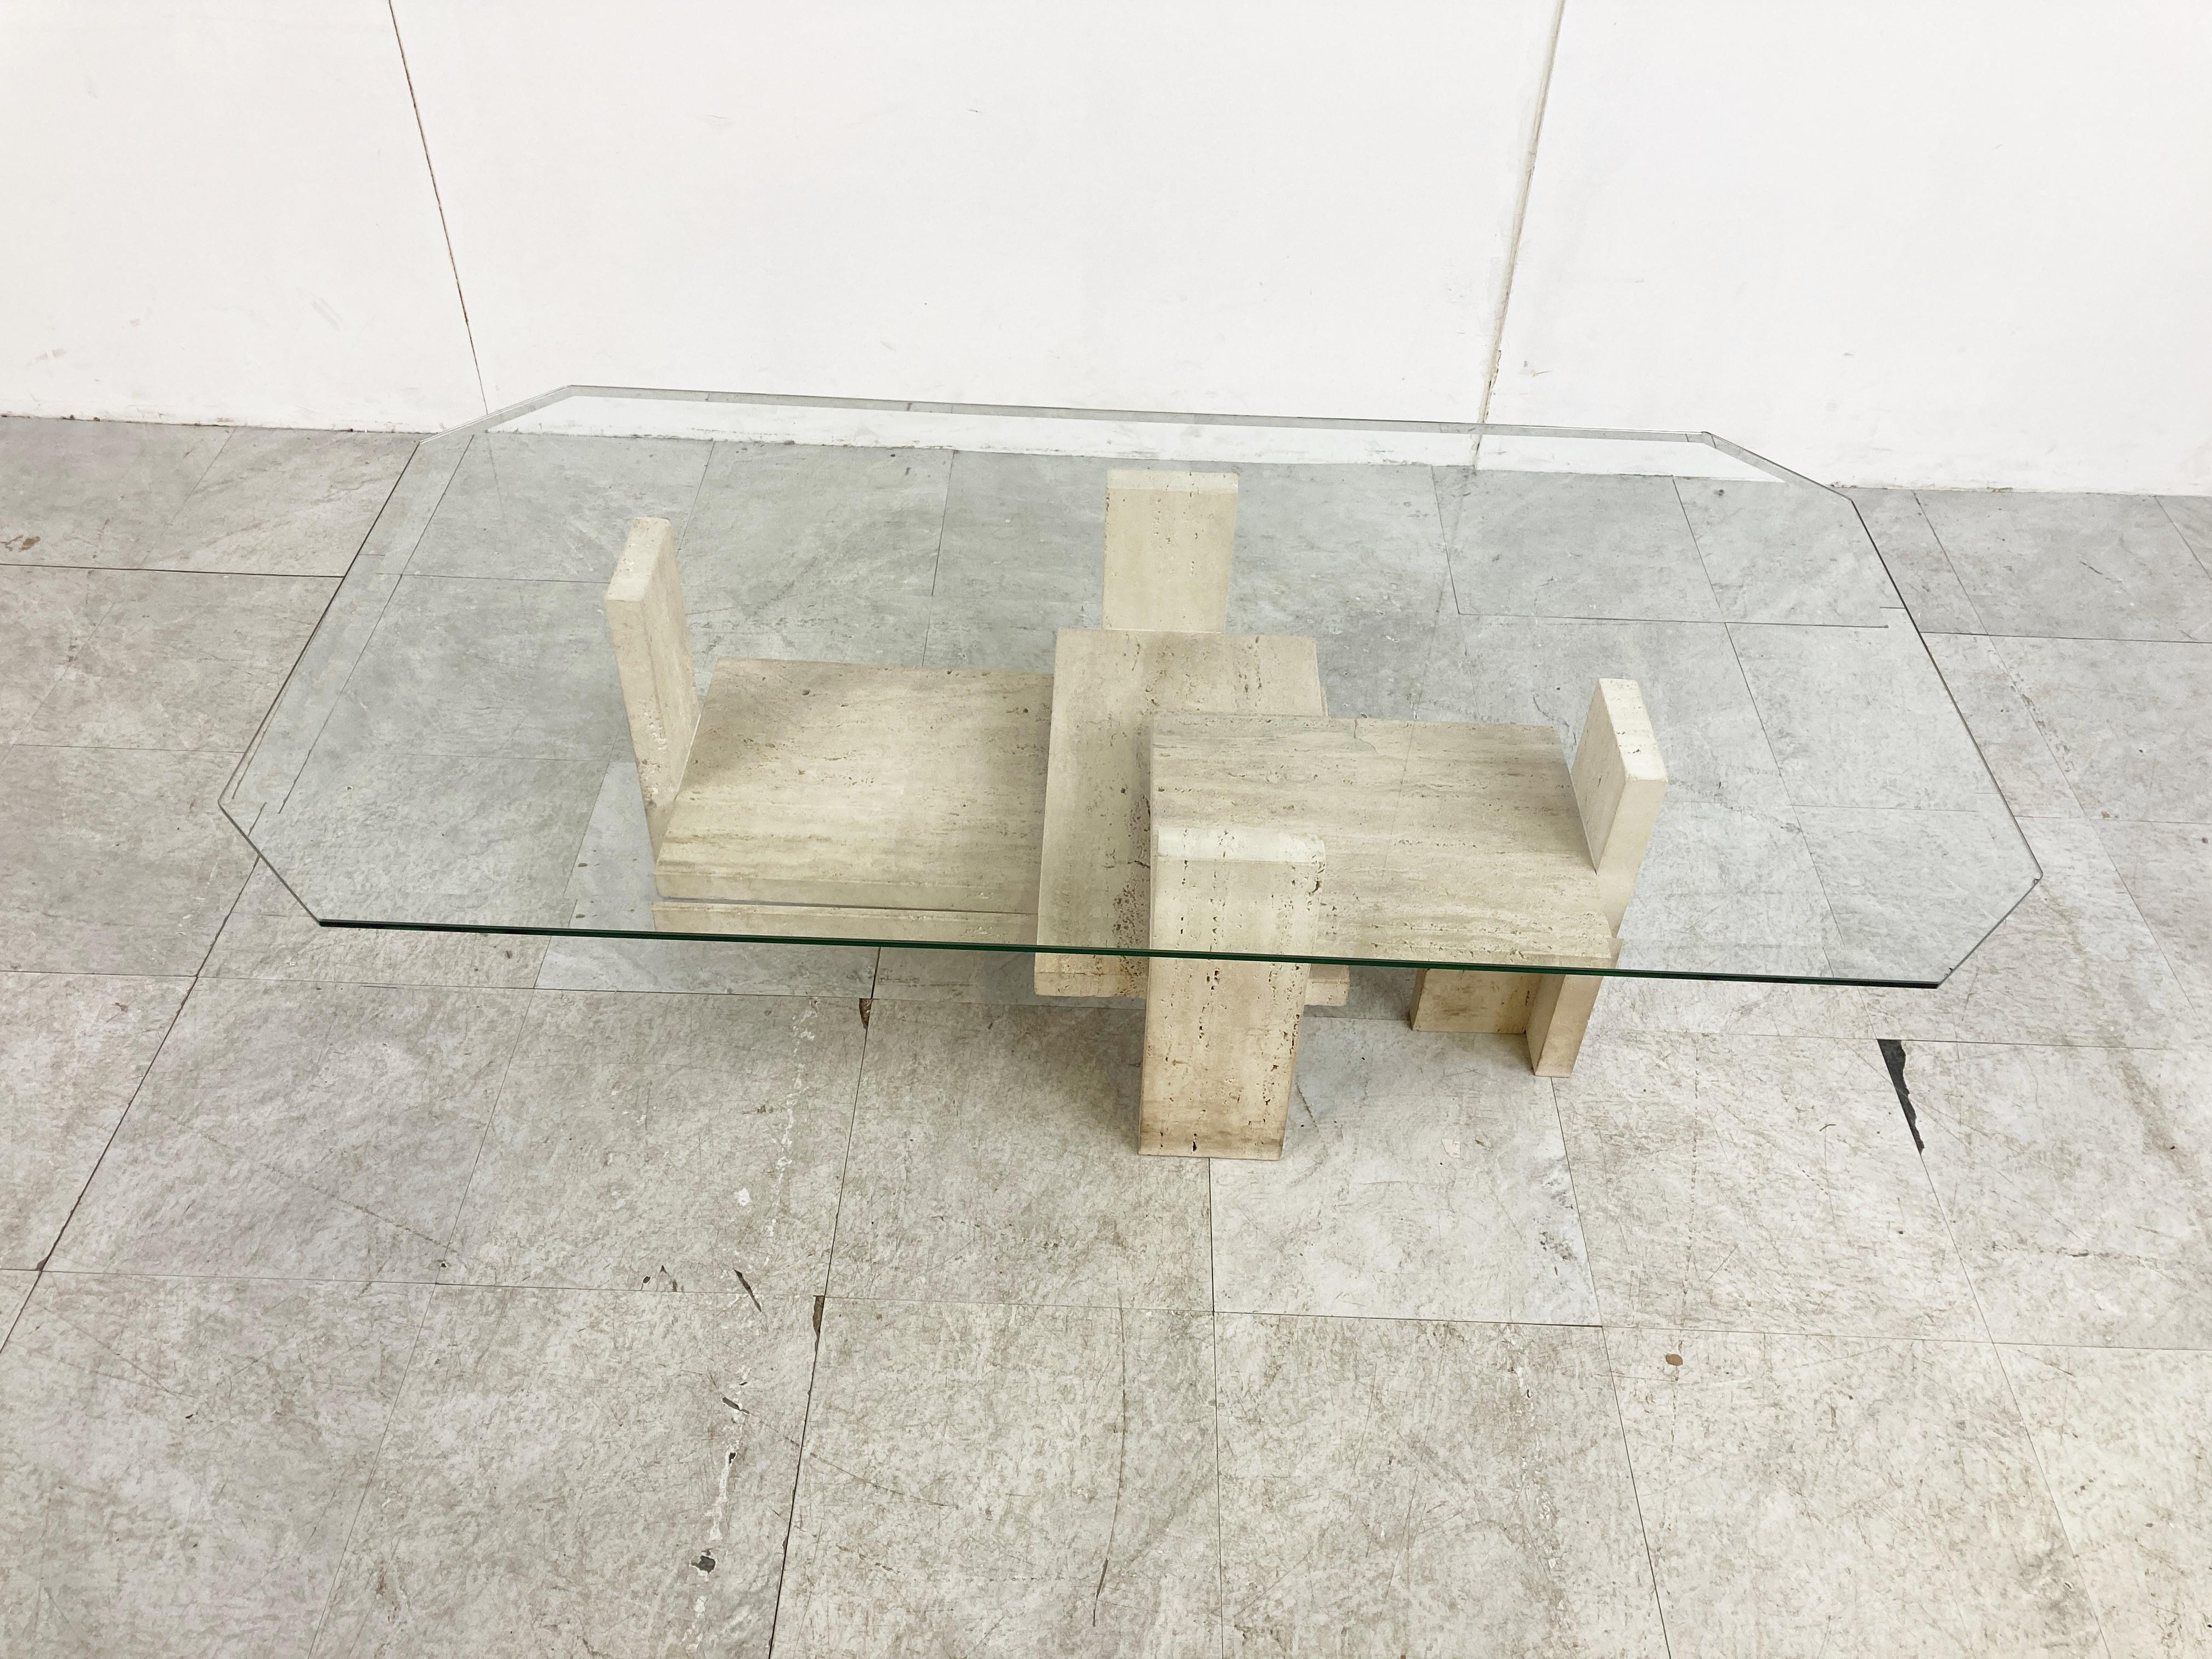 Architectural coffee table made from a solid travertine base. 

The table was designed by Willy Ballez.

All these tables are handmade, so they are always a bit different.

The modern look/design mixes well with nowadays interiors, especially